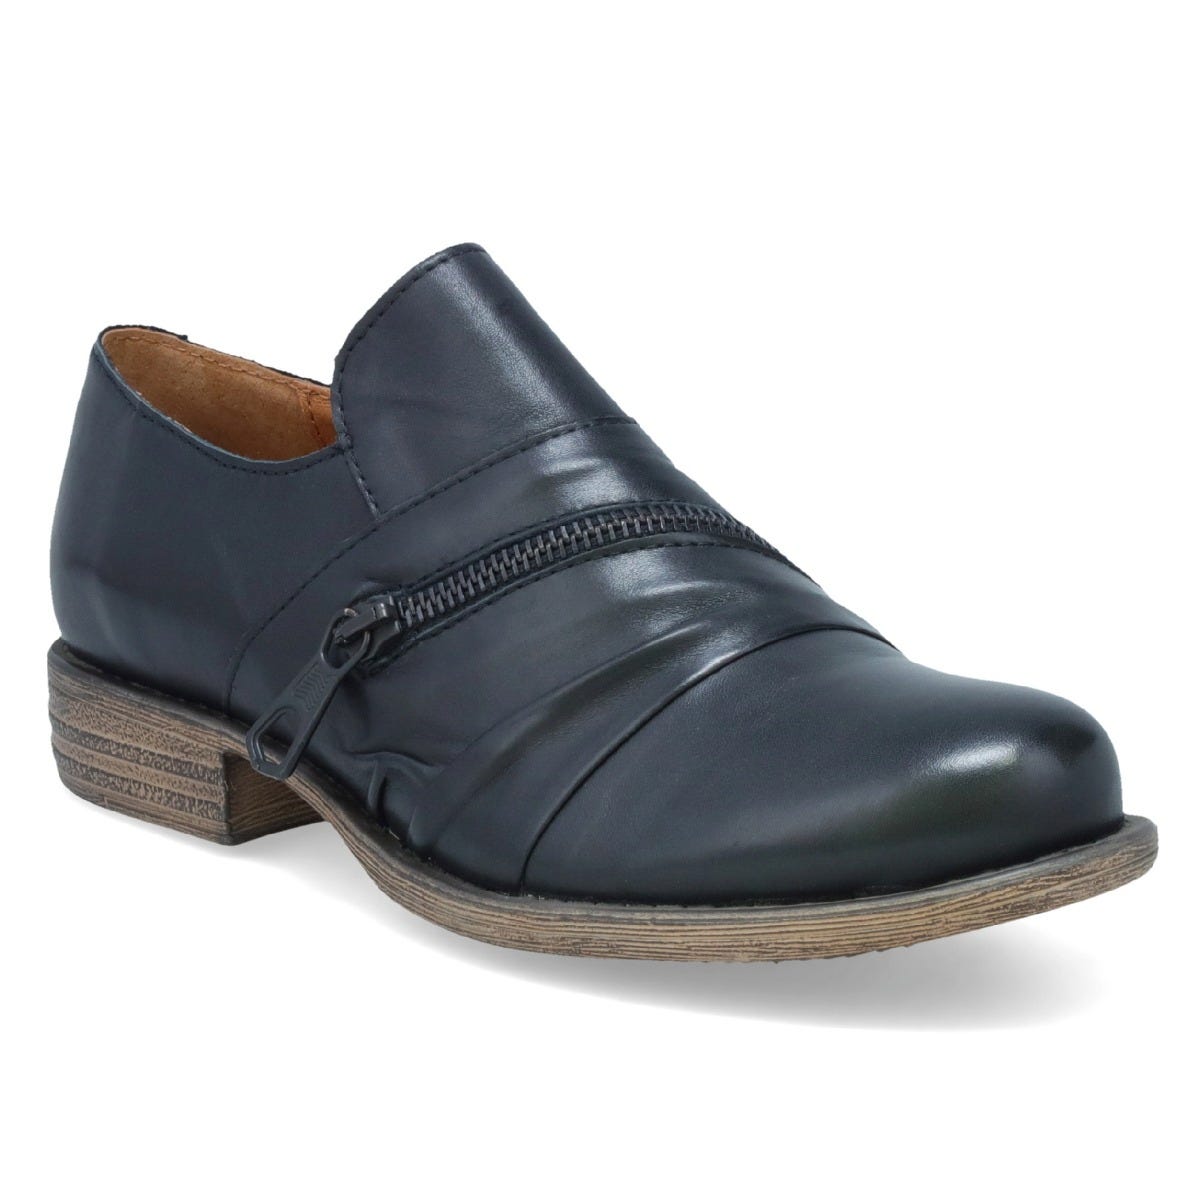 Outer front view of the miz mooz lyric oxford shoe. This flat shoe is a slip on. It is black with a decorative zipper over the instep.